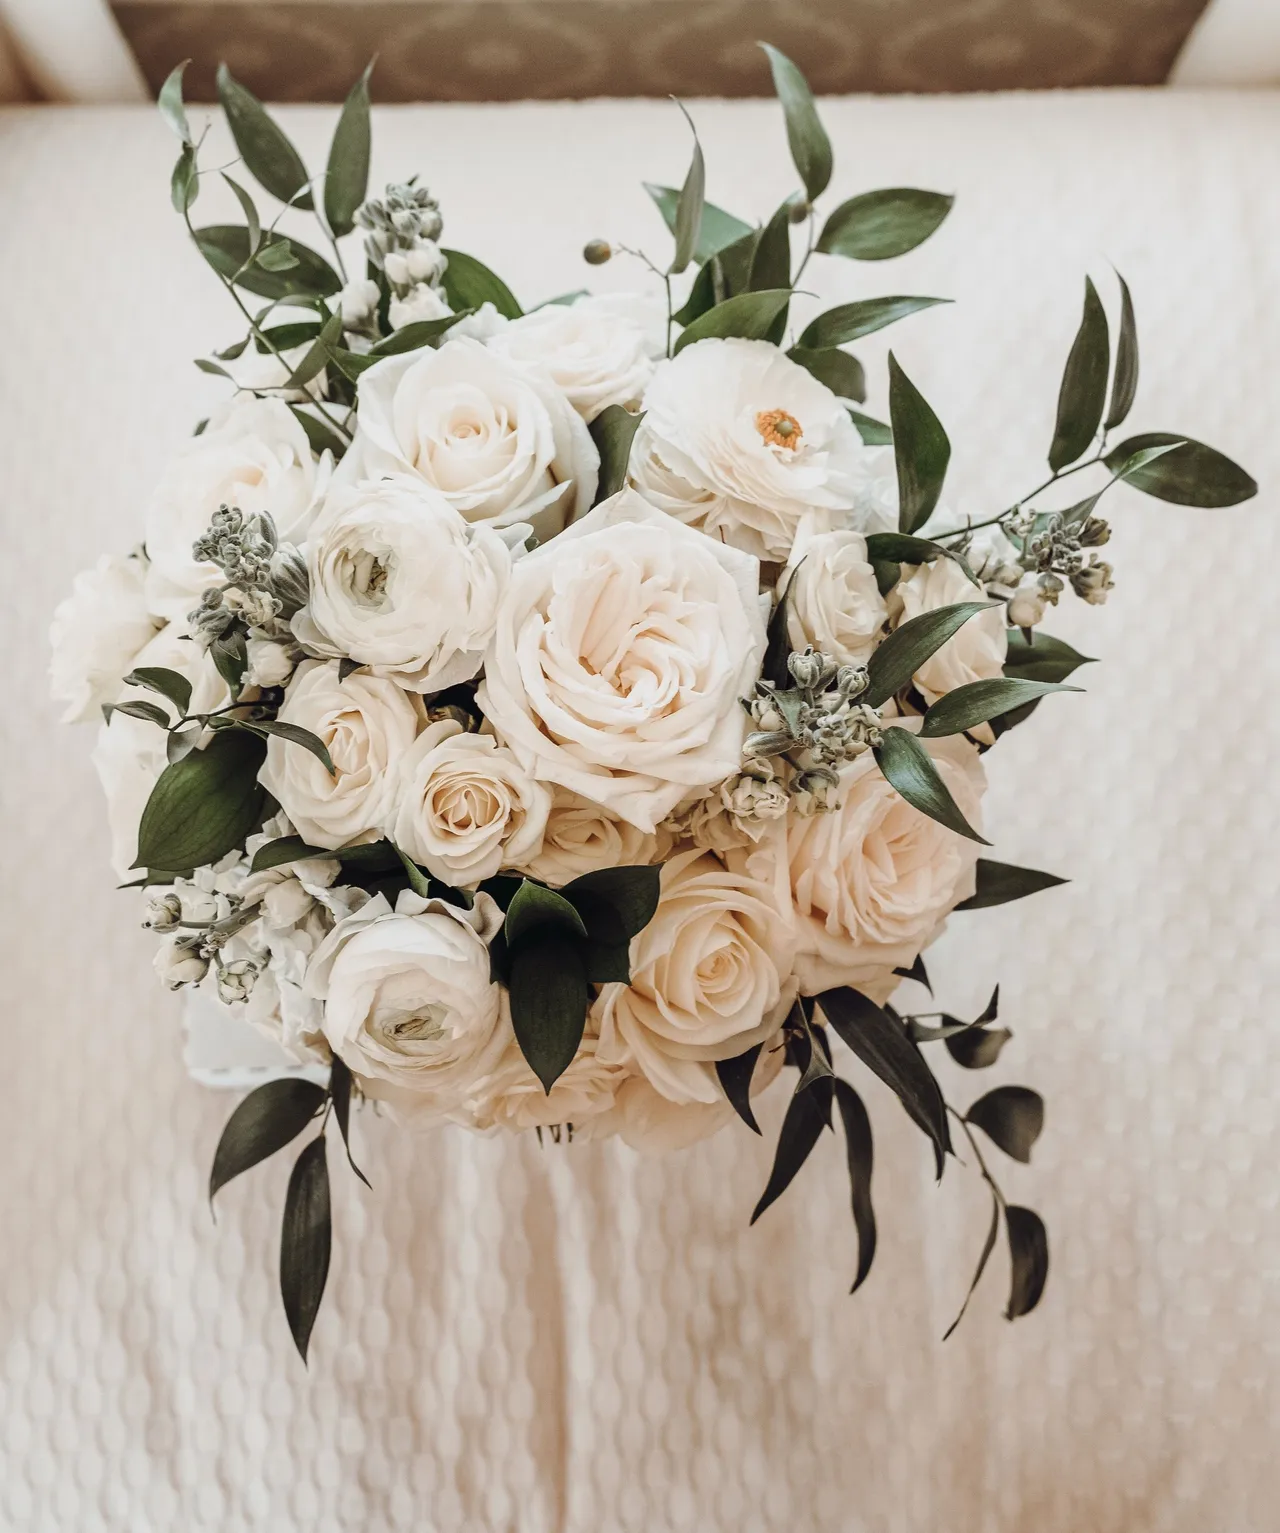 White Roses and White Garden Roses Table Centerpiece